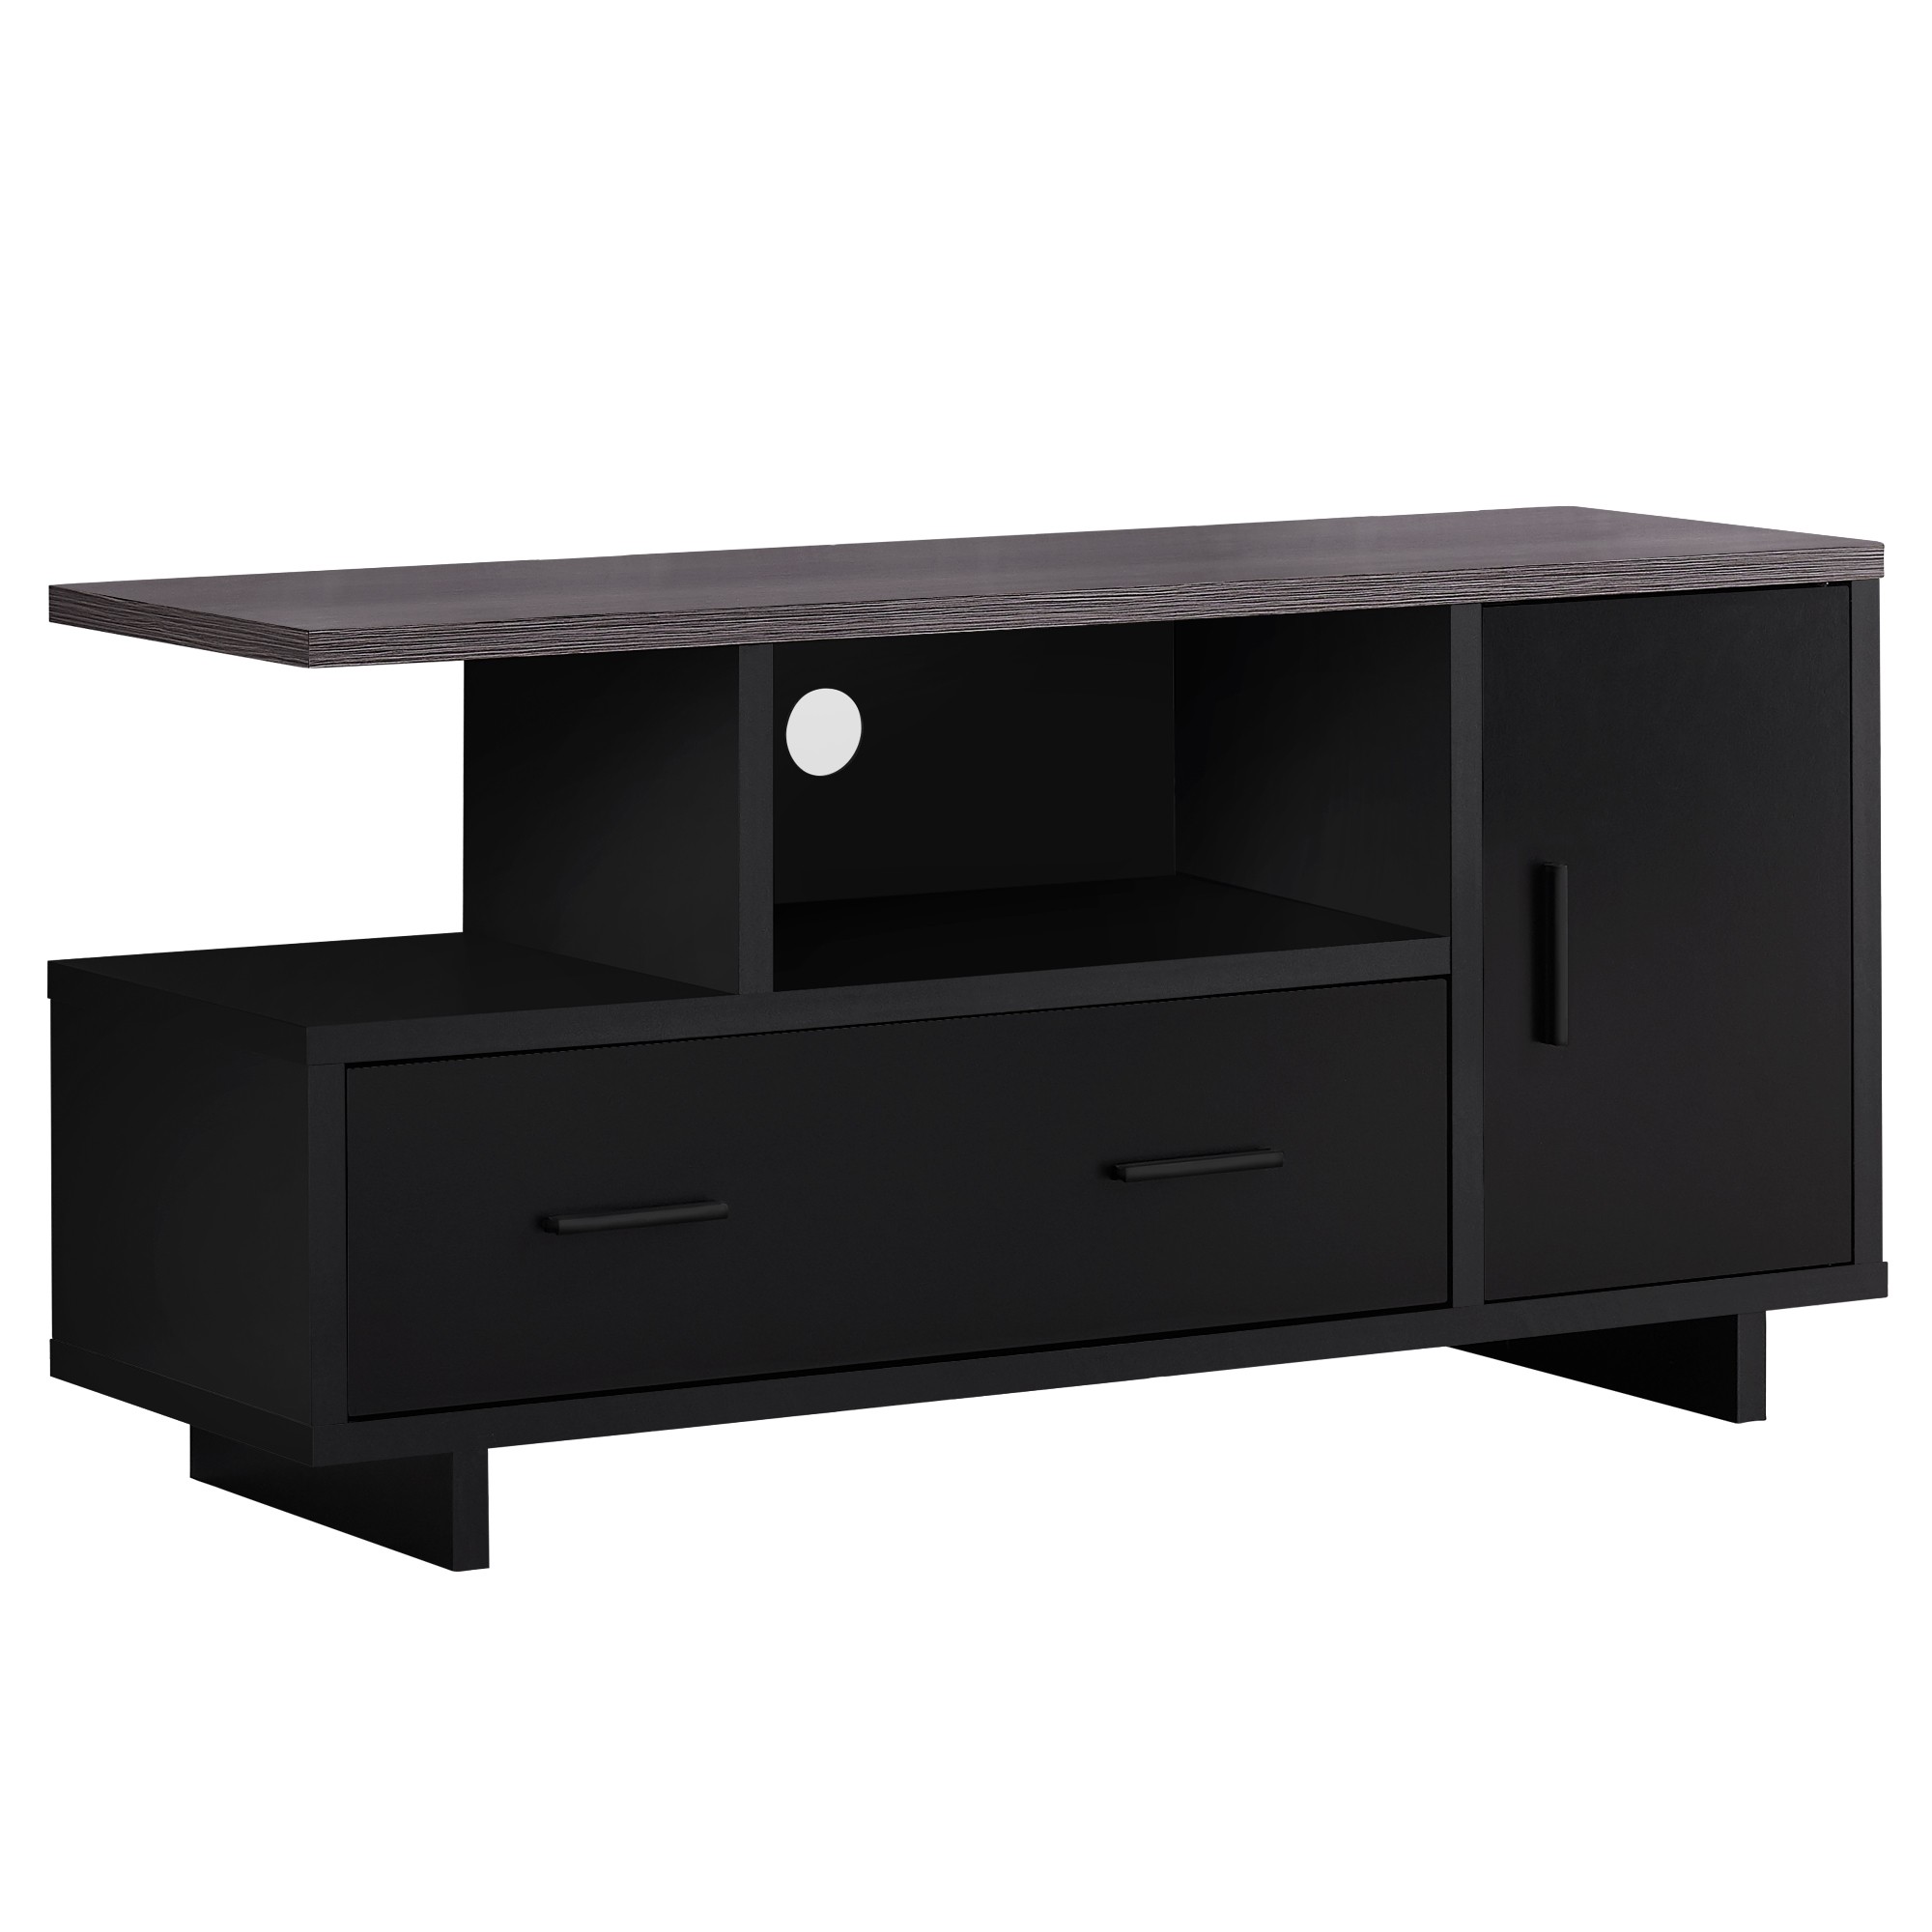 TV STAND - 48"L / BLACK / GREY TOP WITH STORAGE